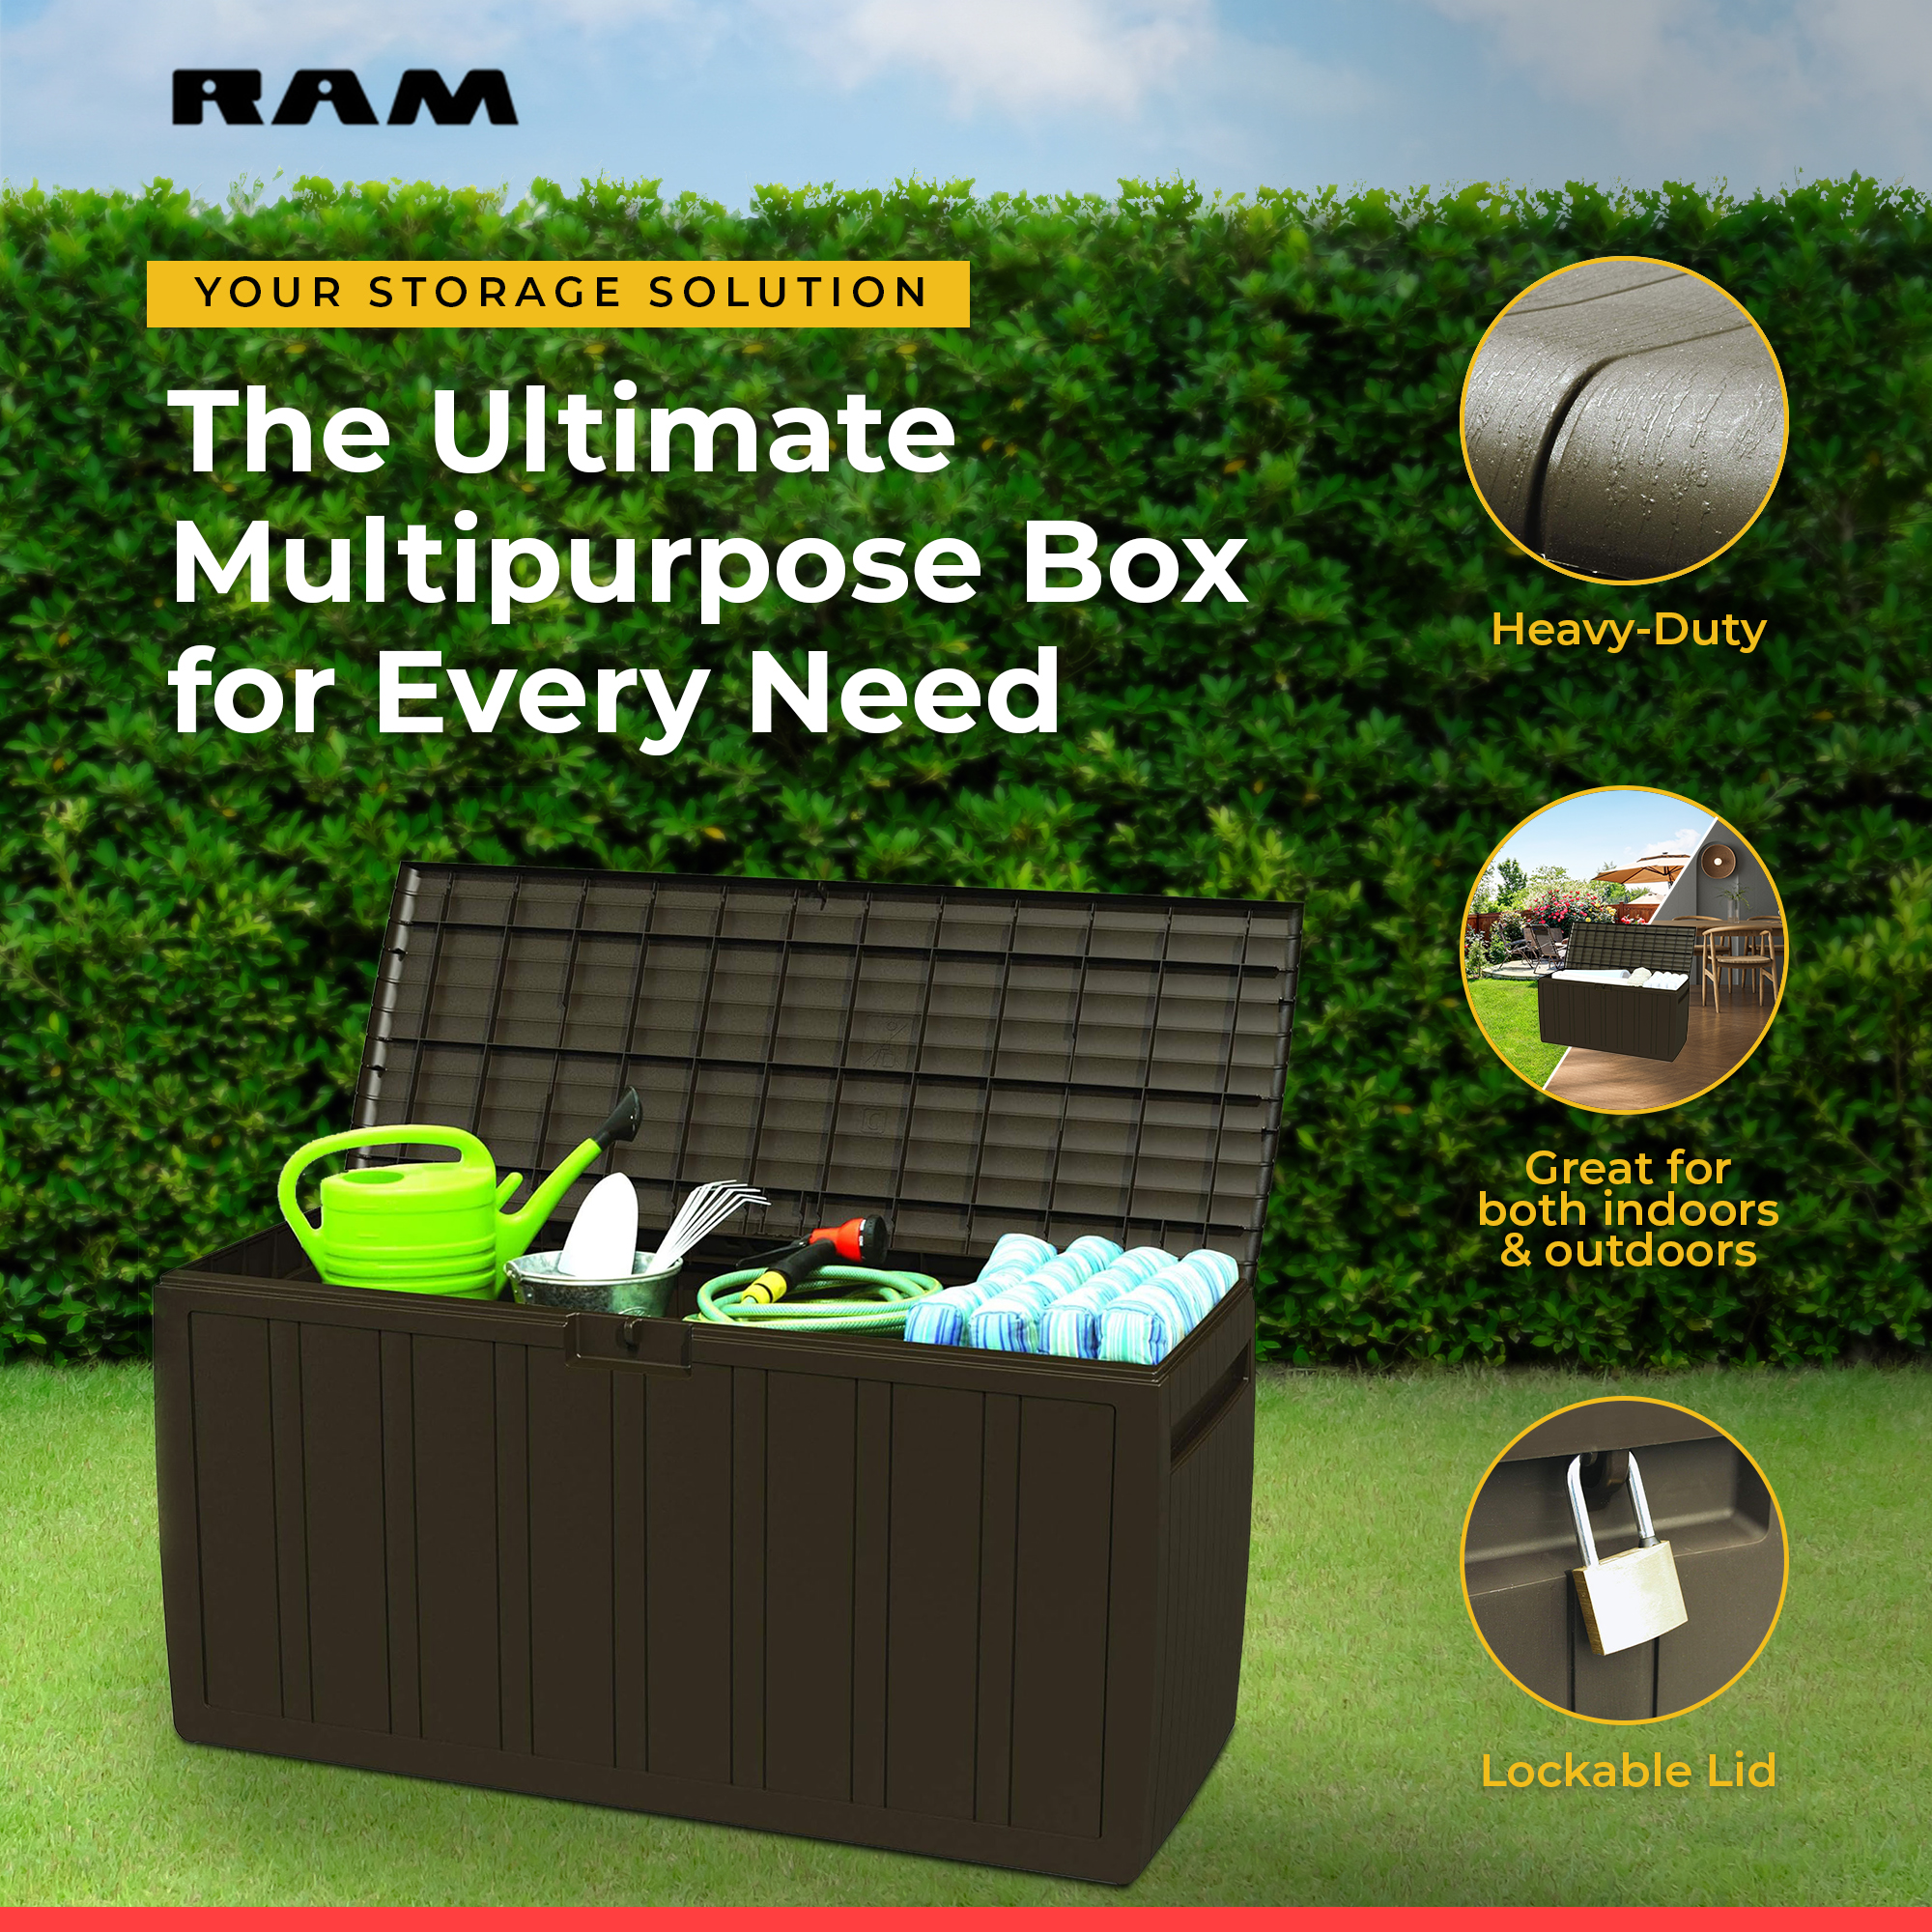 Ram Quality Products 71 Gallon Outdoor Backyard Patio Storage Deck Box - image 2 of 11